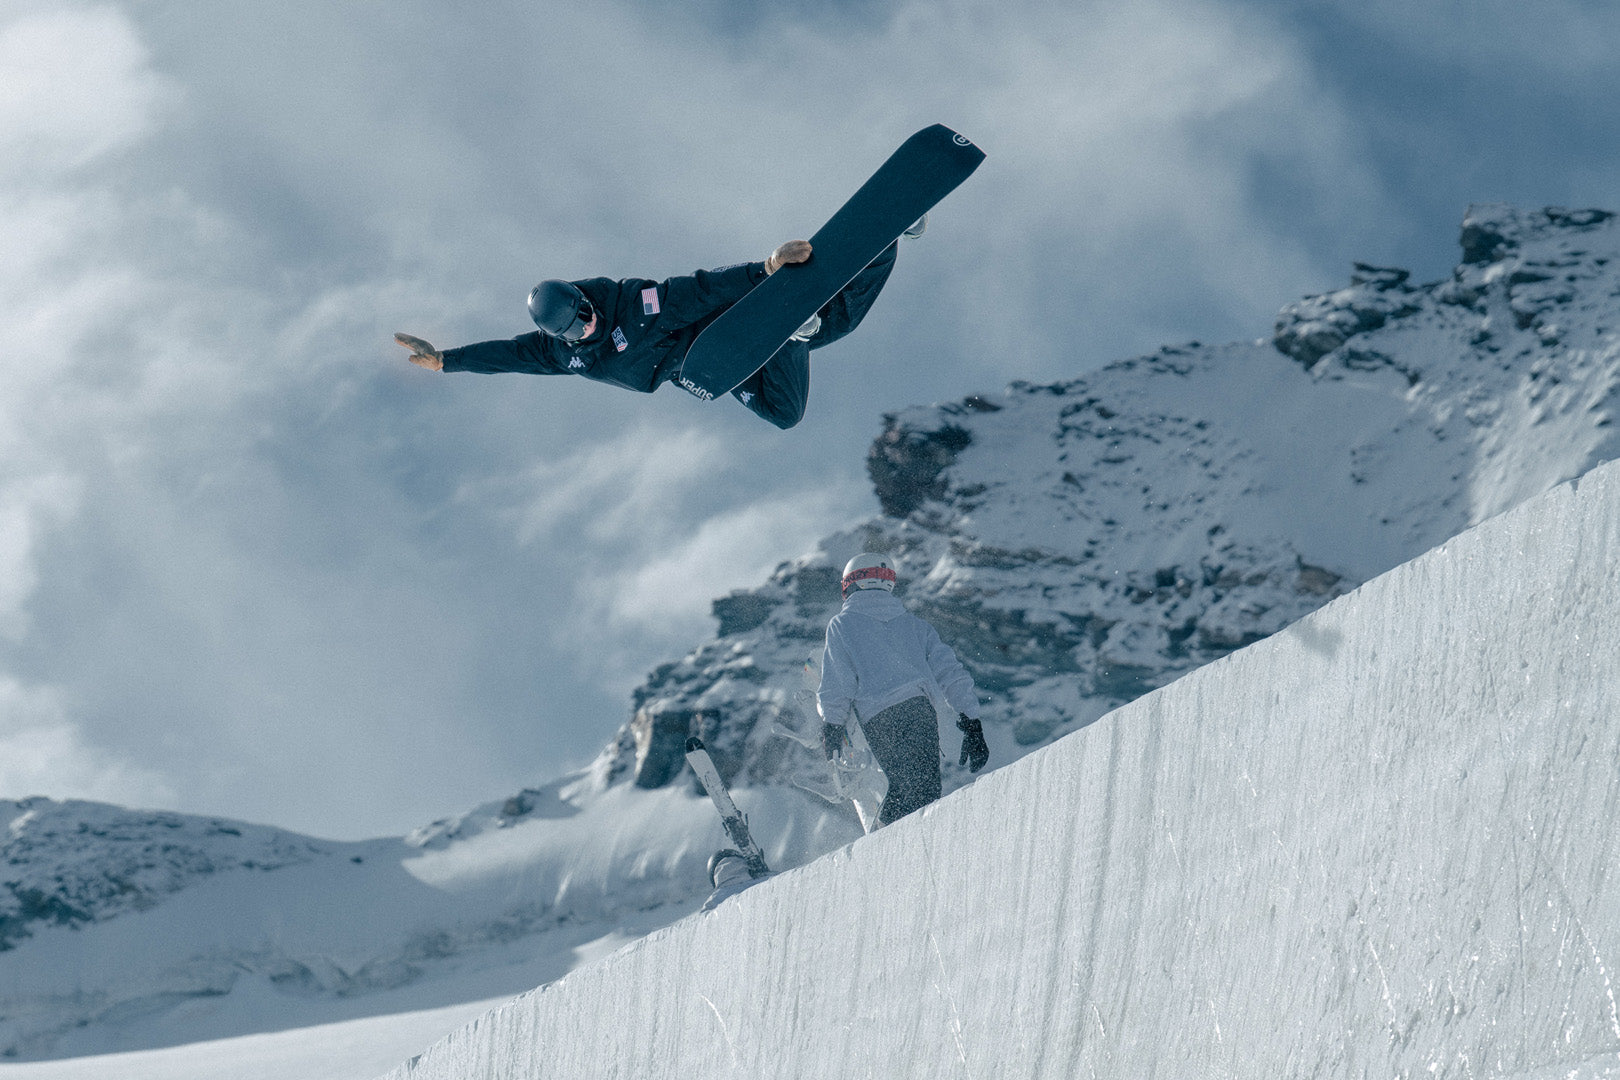 US Snowboarder pops a trick in the air on the slope in official US Kappa gear. 